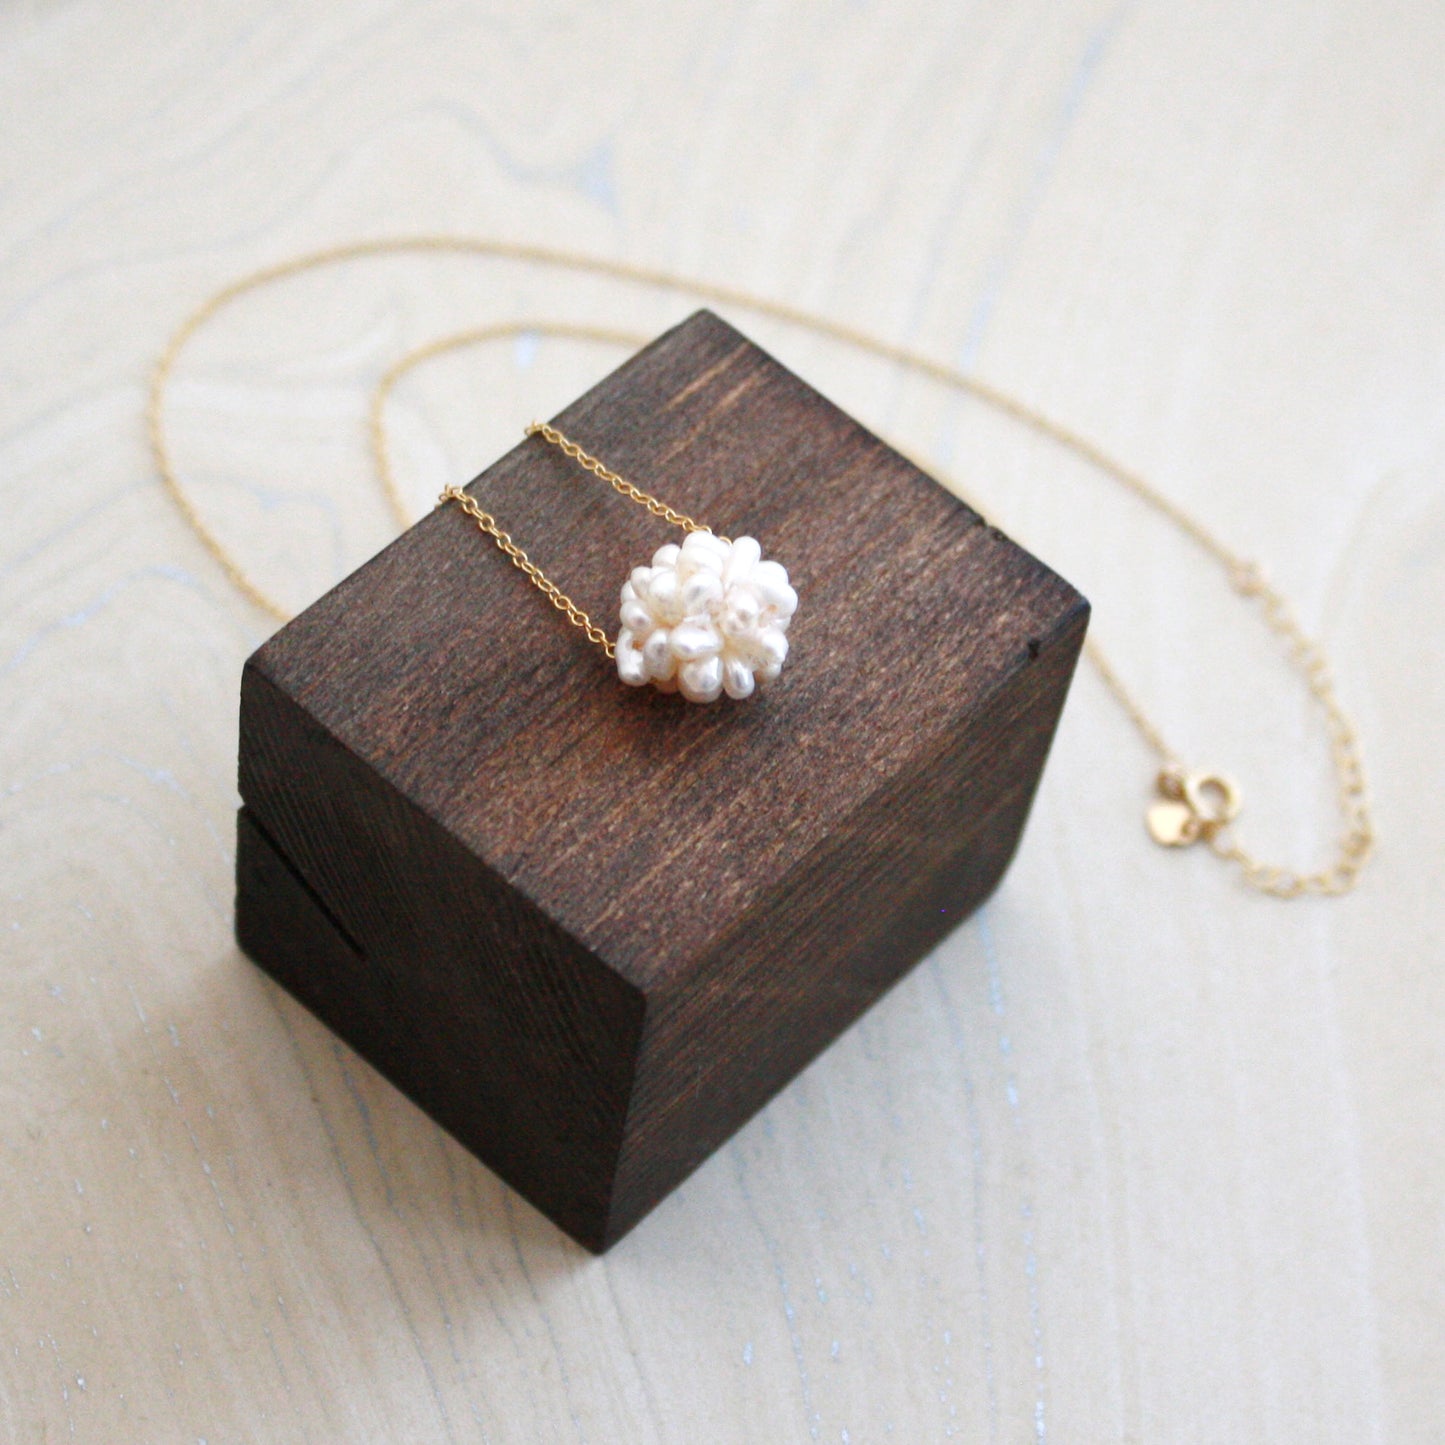 Pearl Ball Necklace